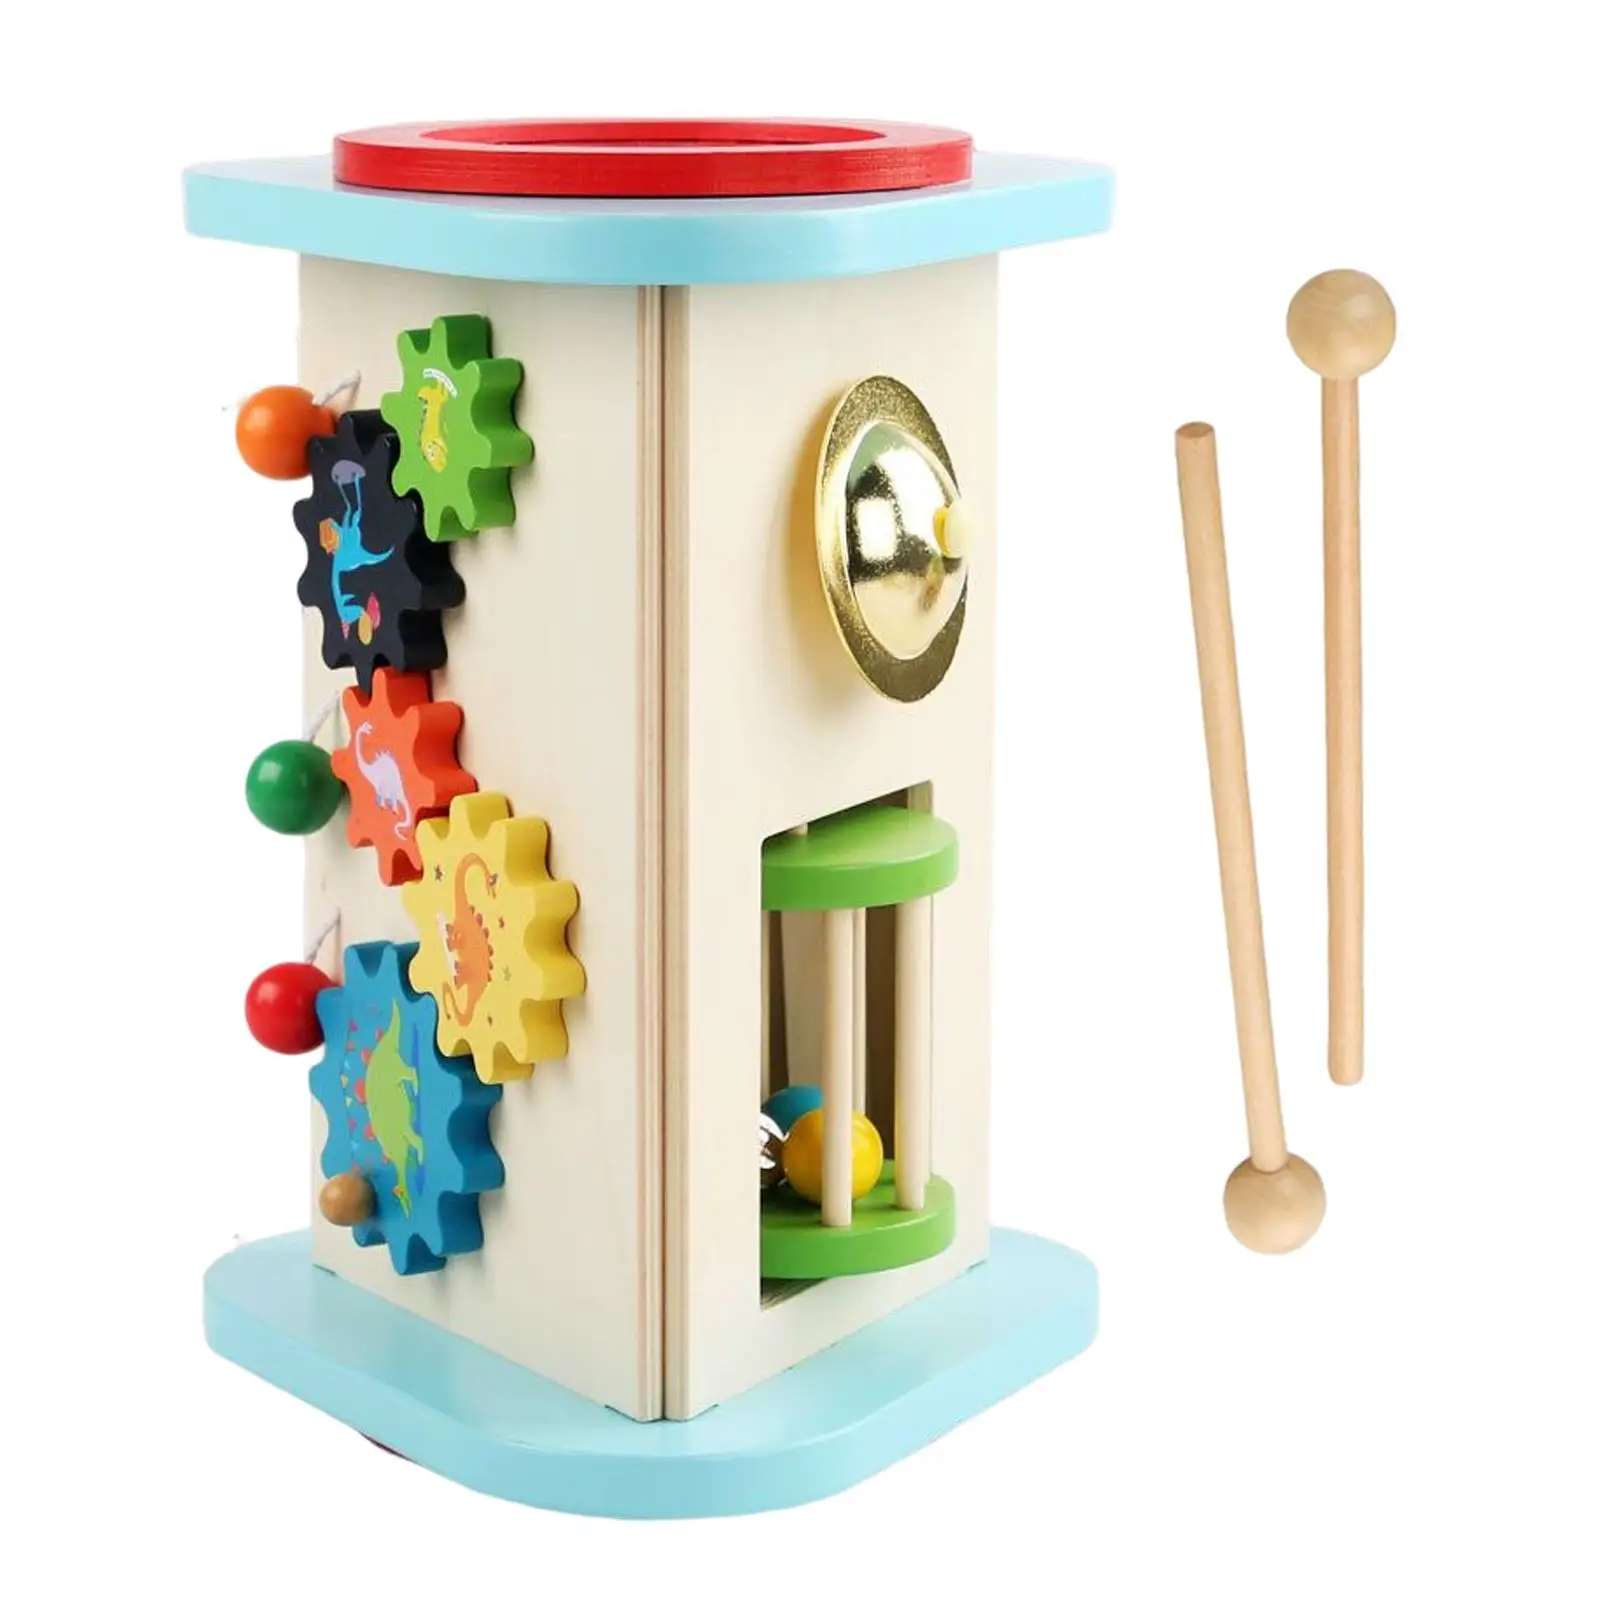 Percussion Instruments Toy Early Learning Sturdy Wooden Multicolor Kids Musical Instrument Toy for Boys Girls Children Gifts